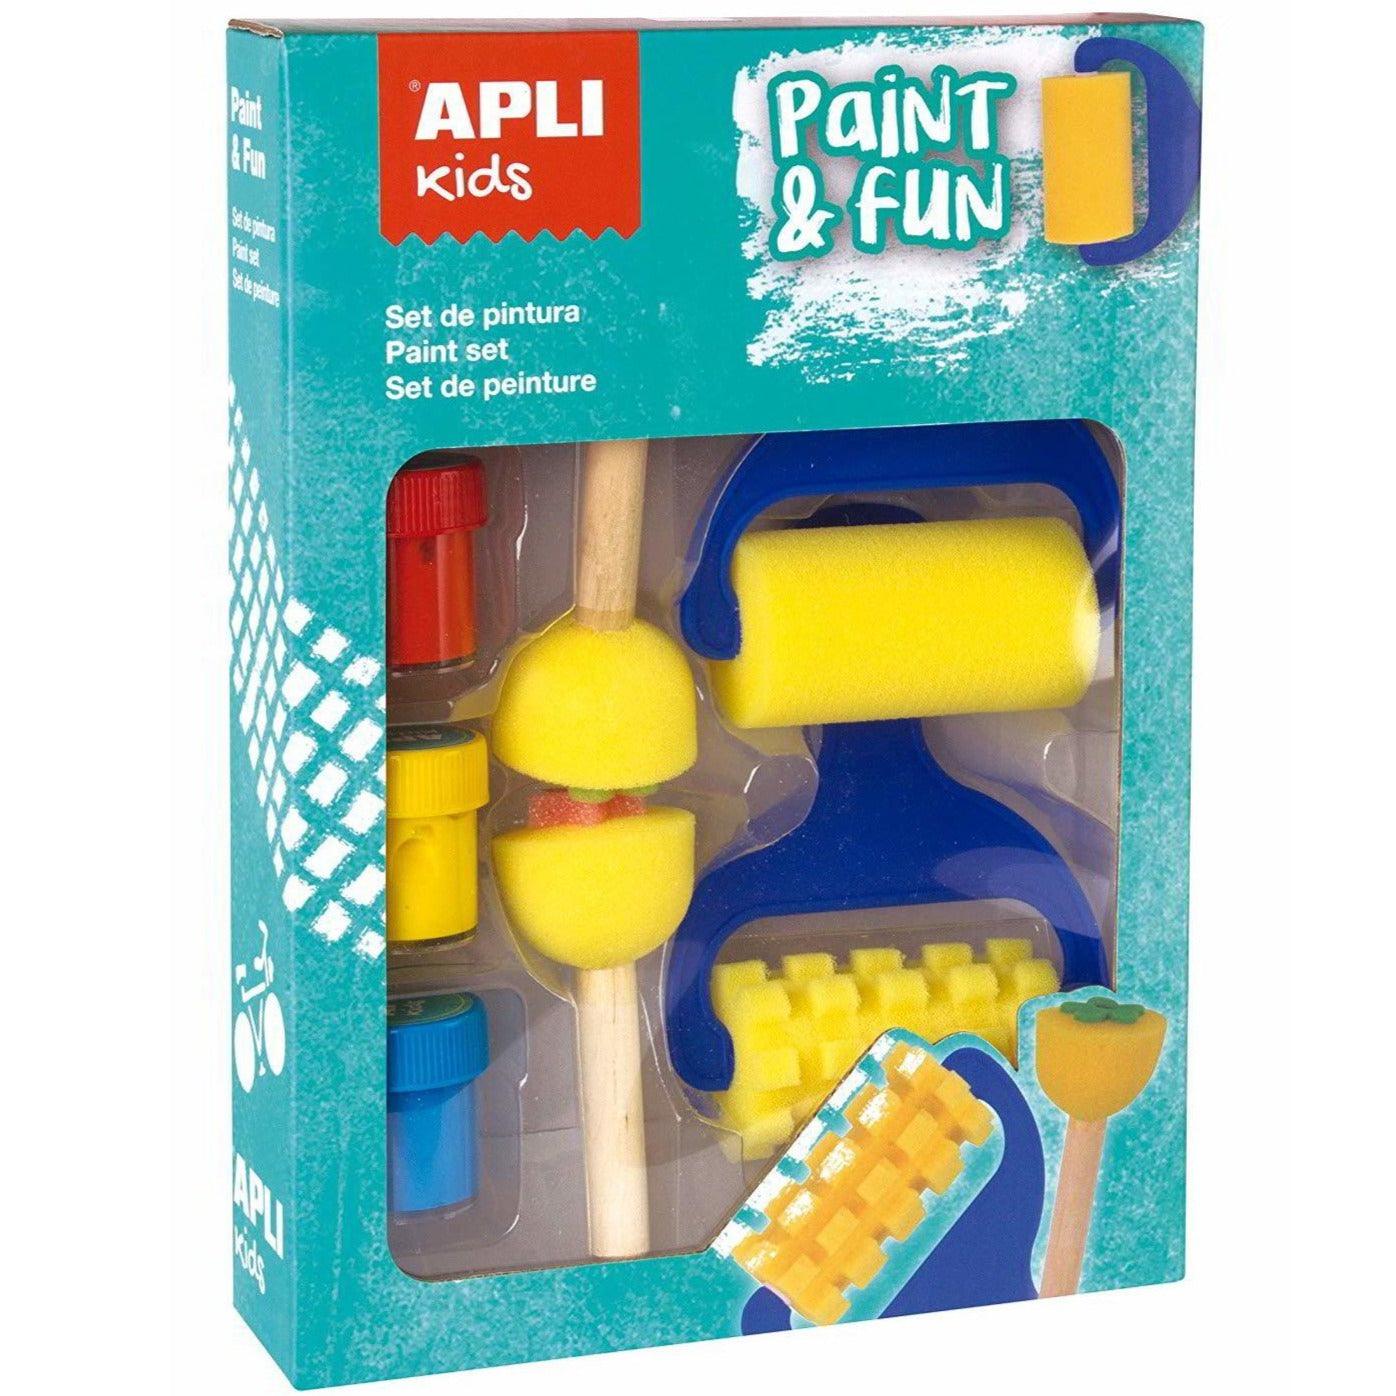 Apli Kids: Paint & Fun stamps and paint rollers